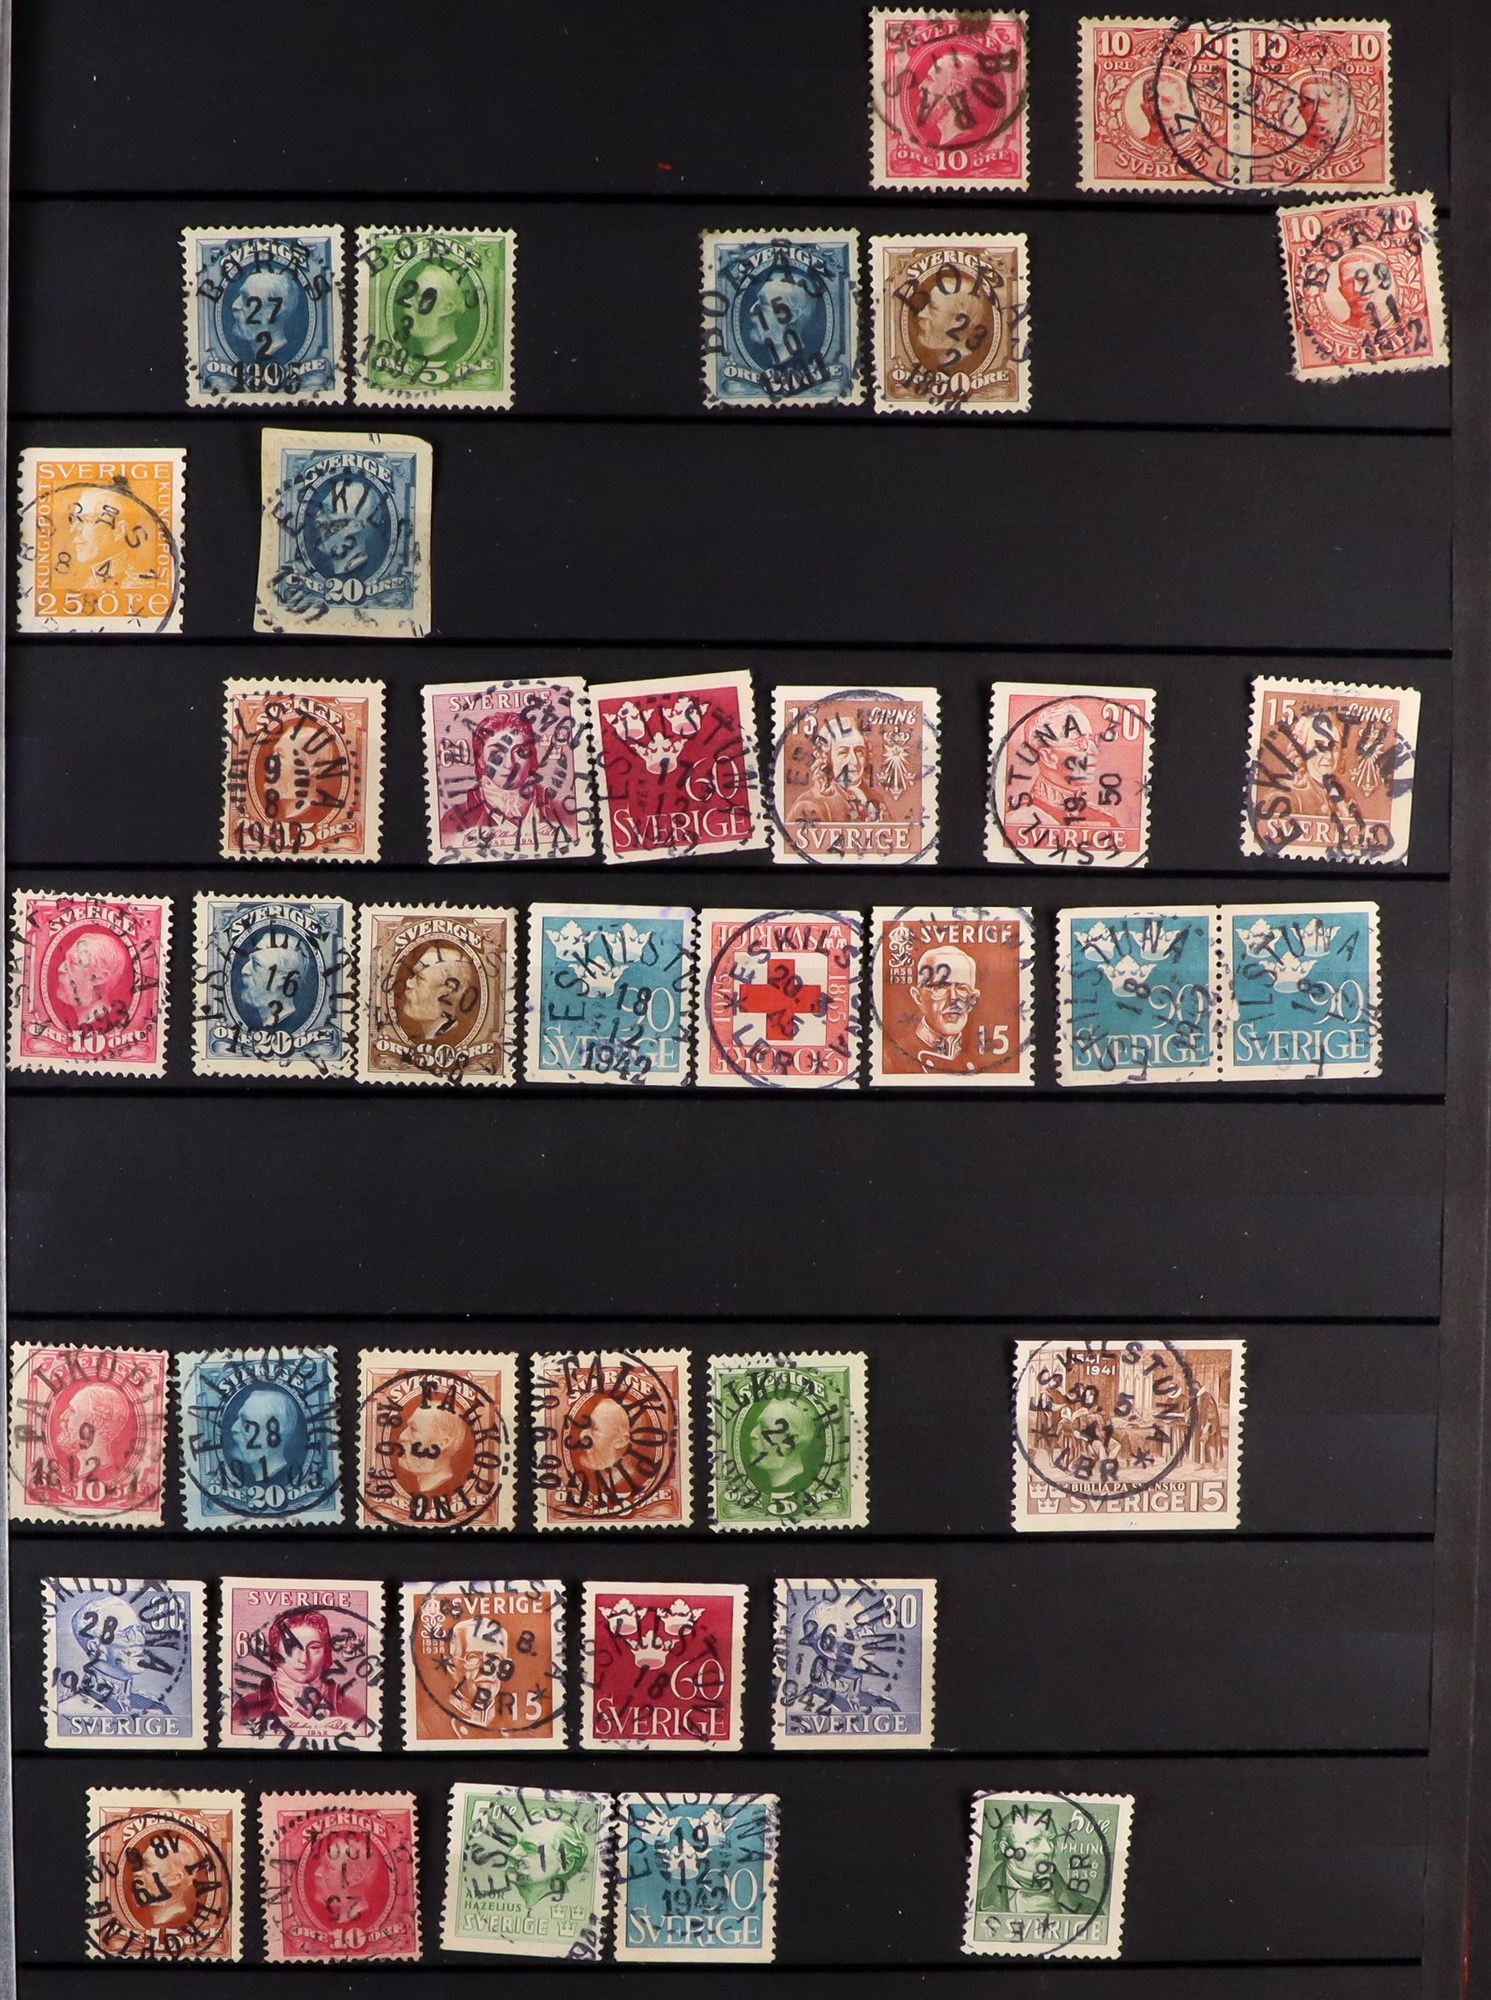 SWEDEN POSTMARKS Mostly 1880's-1950's used stamps selected for nice cancels, mostly with superb